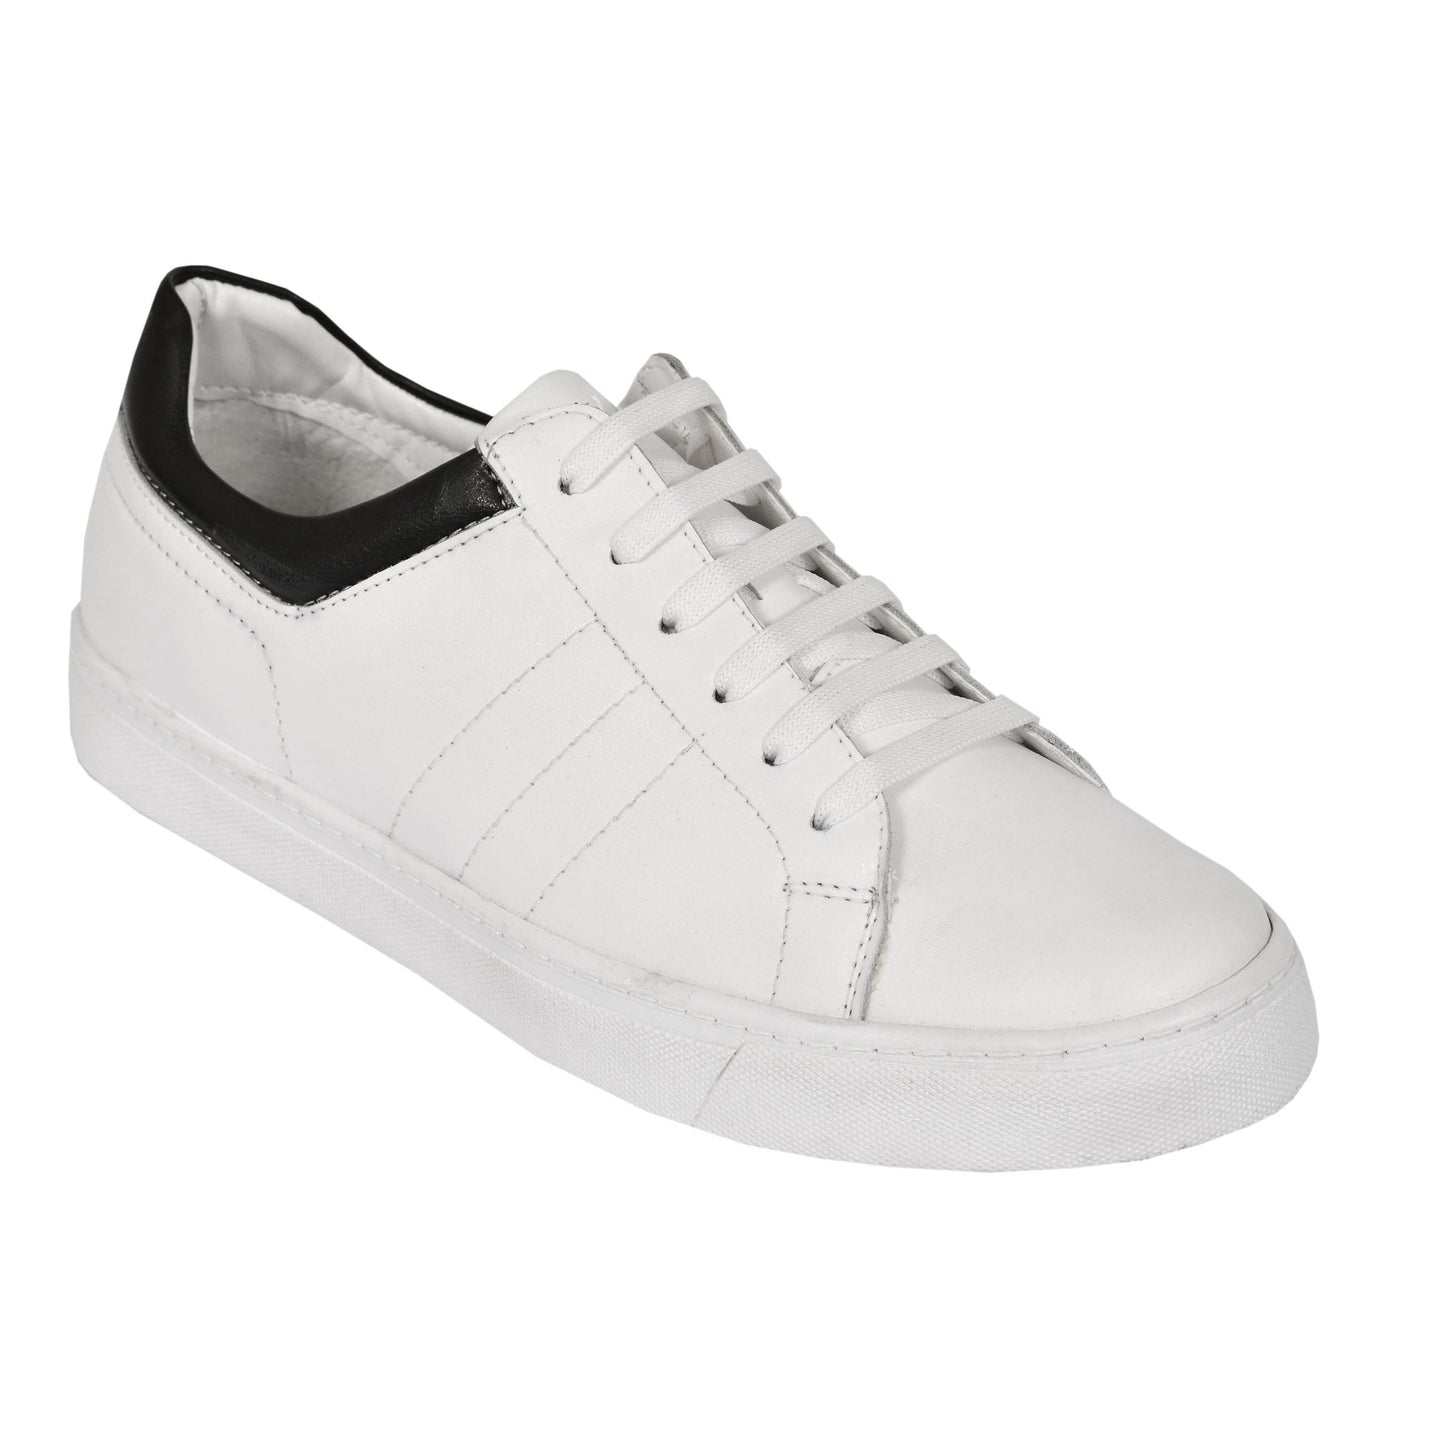 2H #9507 White/Black Casual Shoes